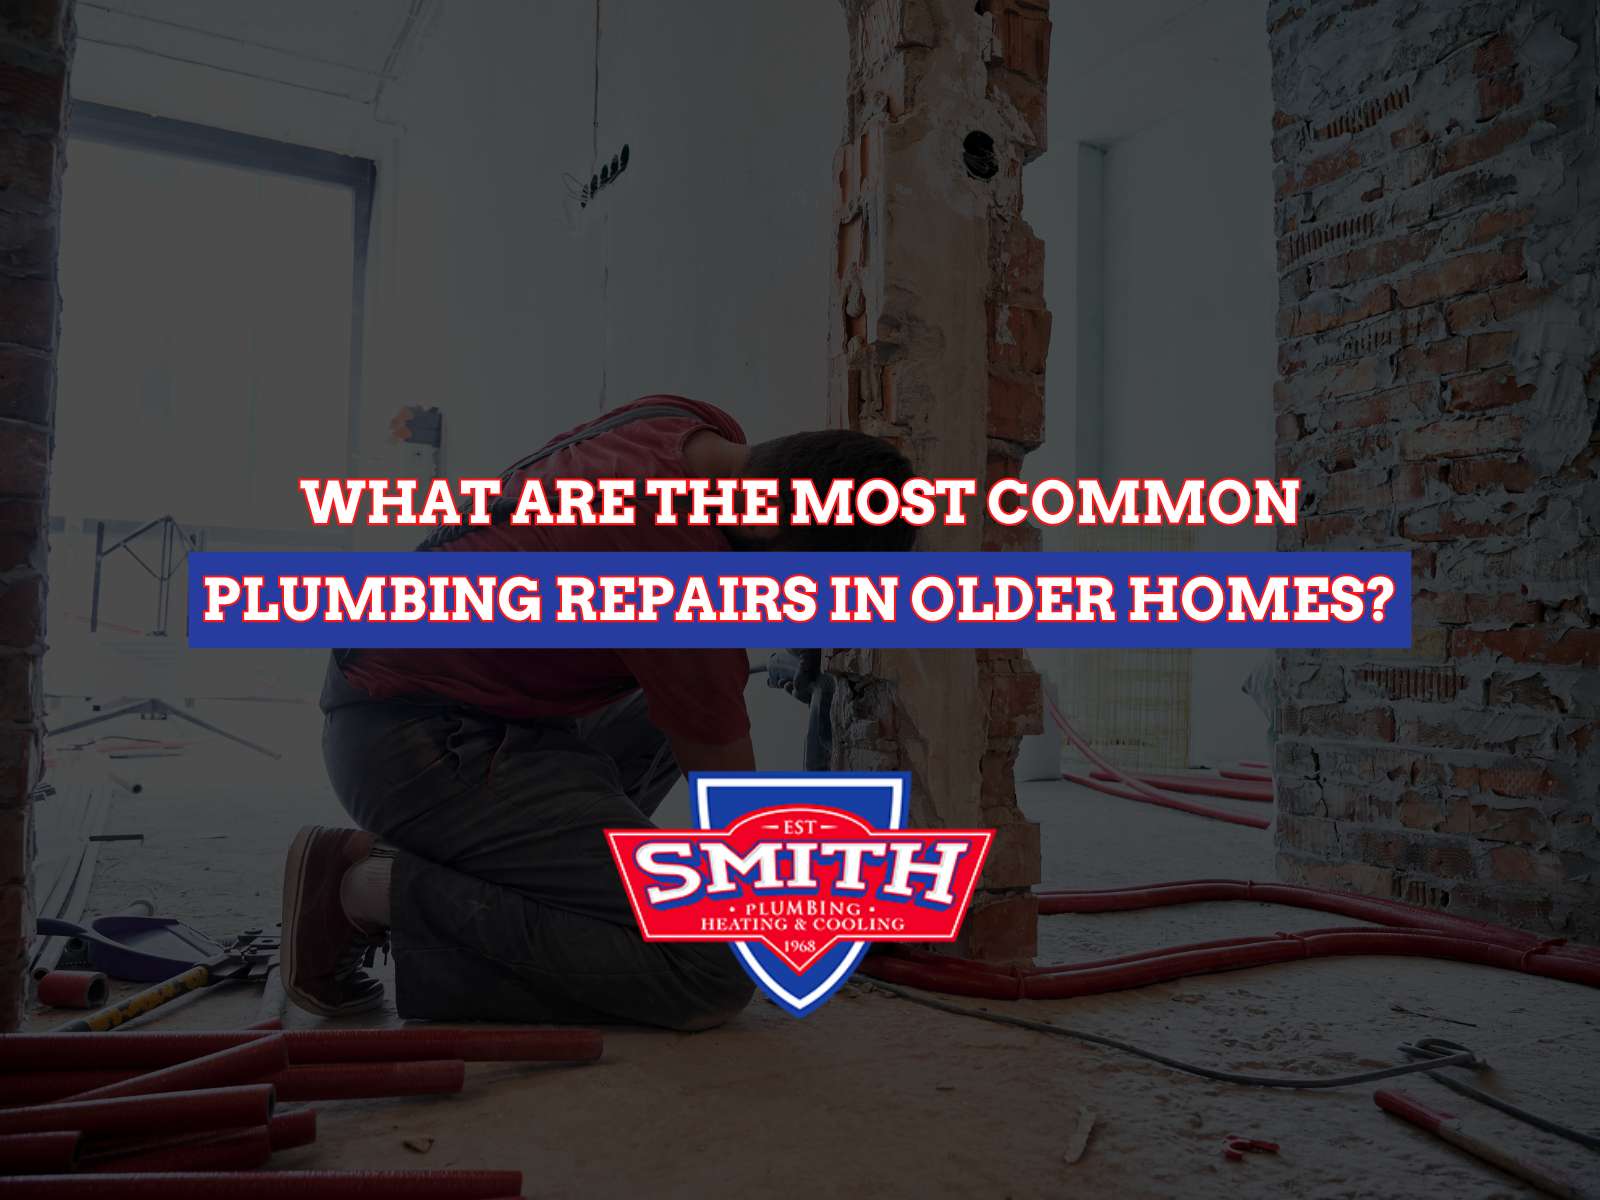 What Are the Most Common Plumbing Repairs in Older Homes?